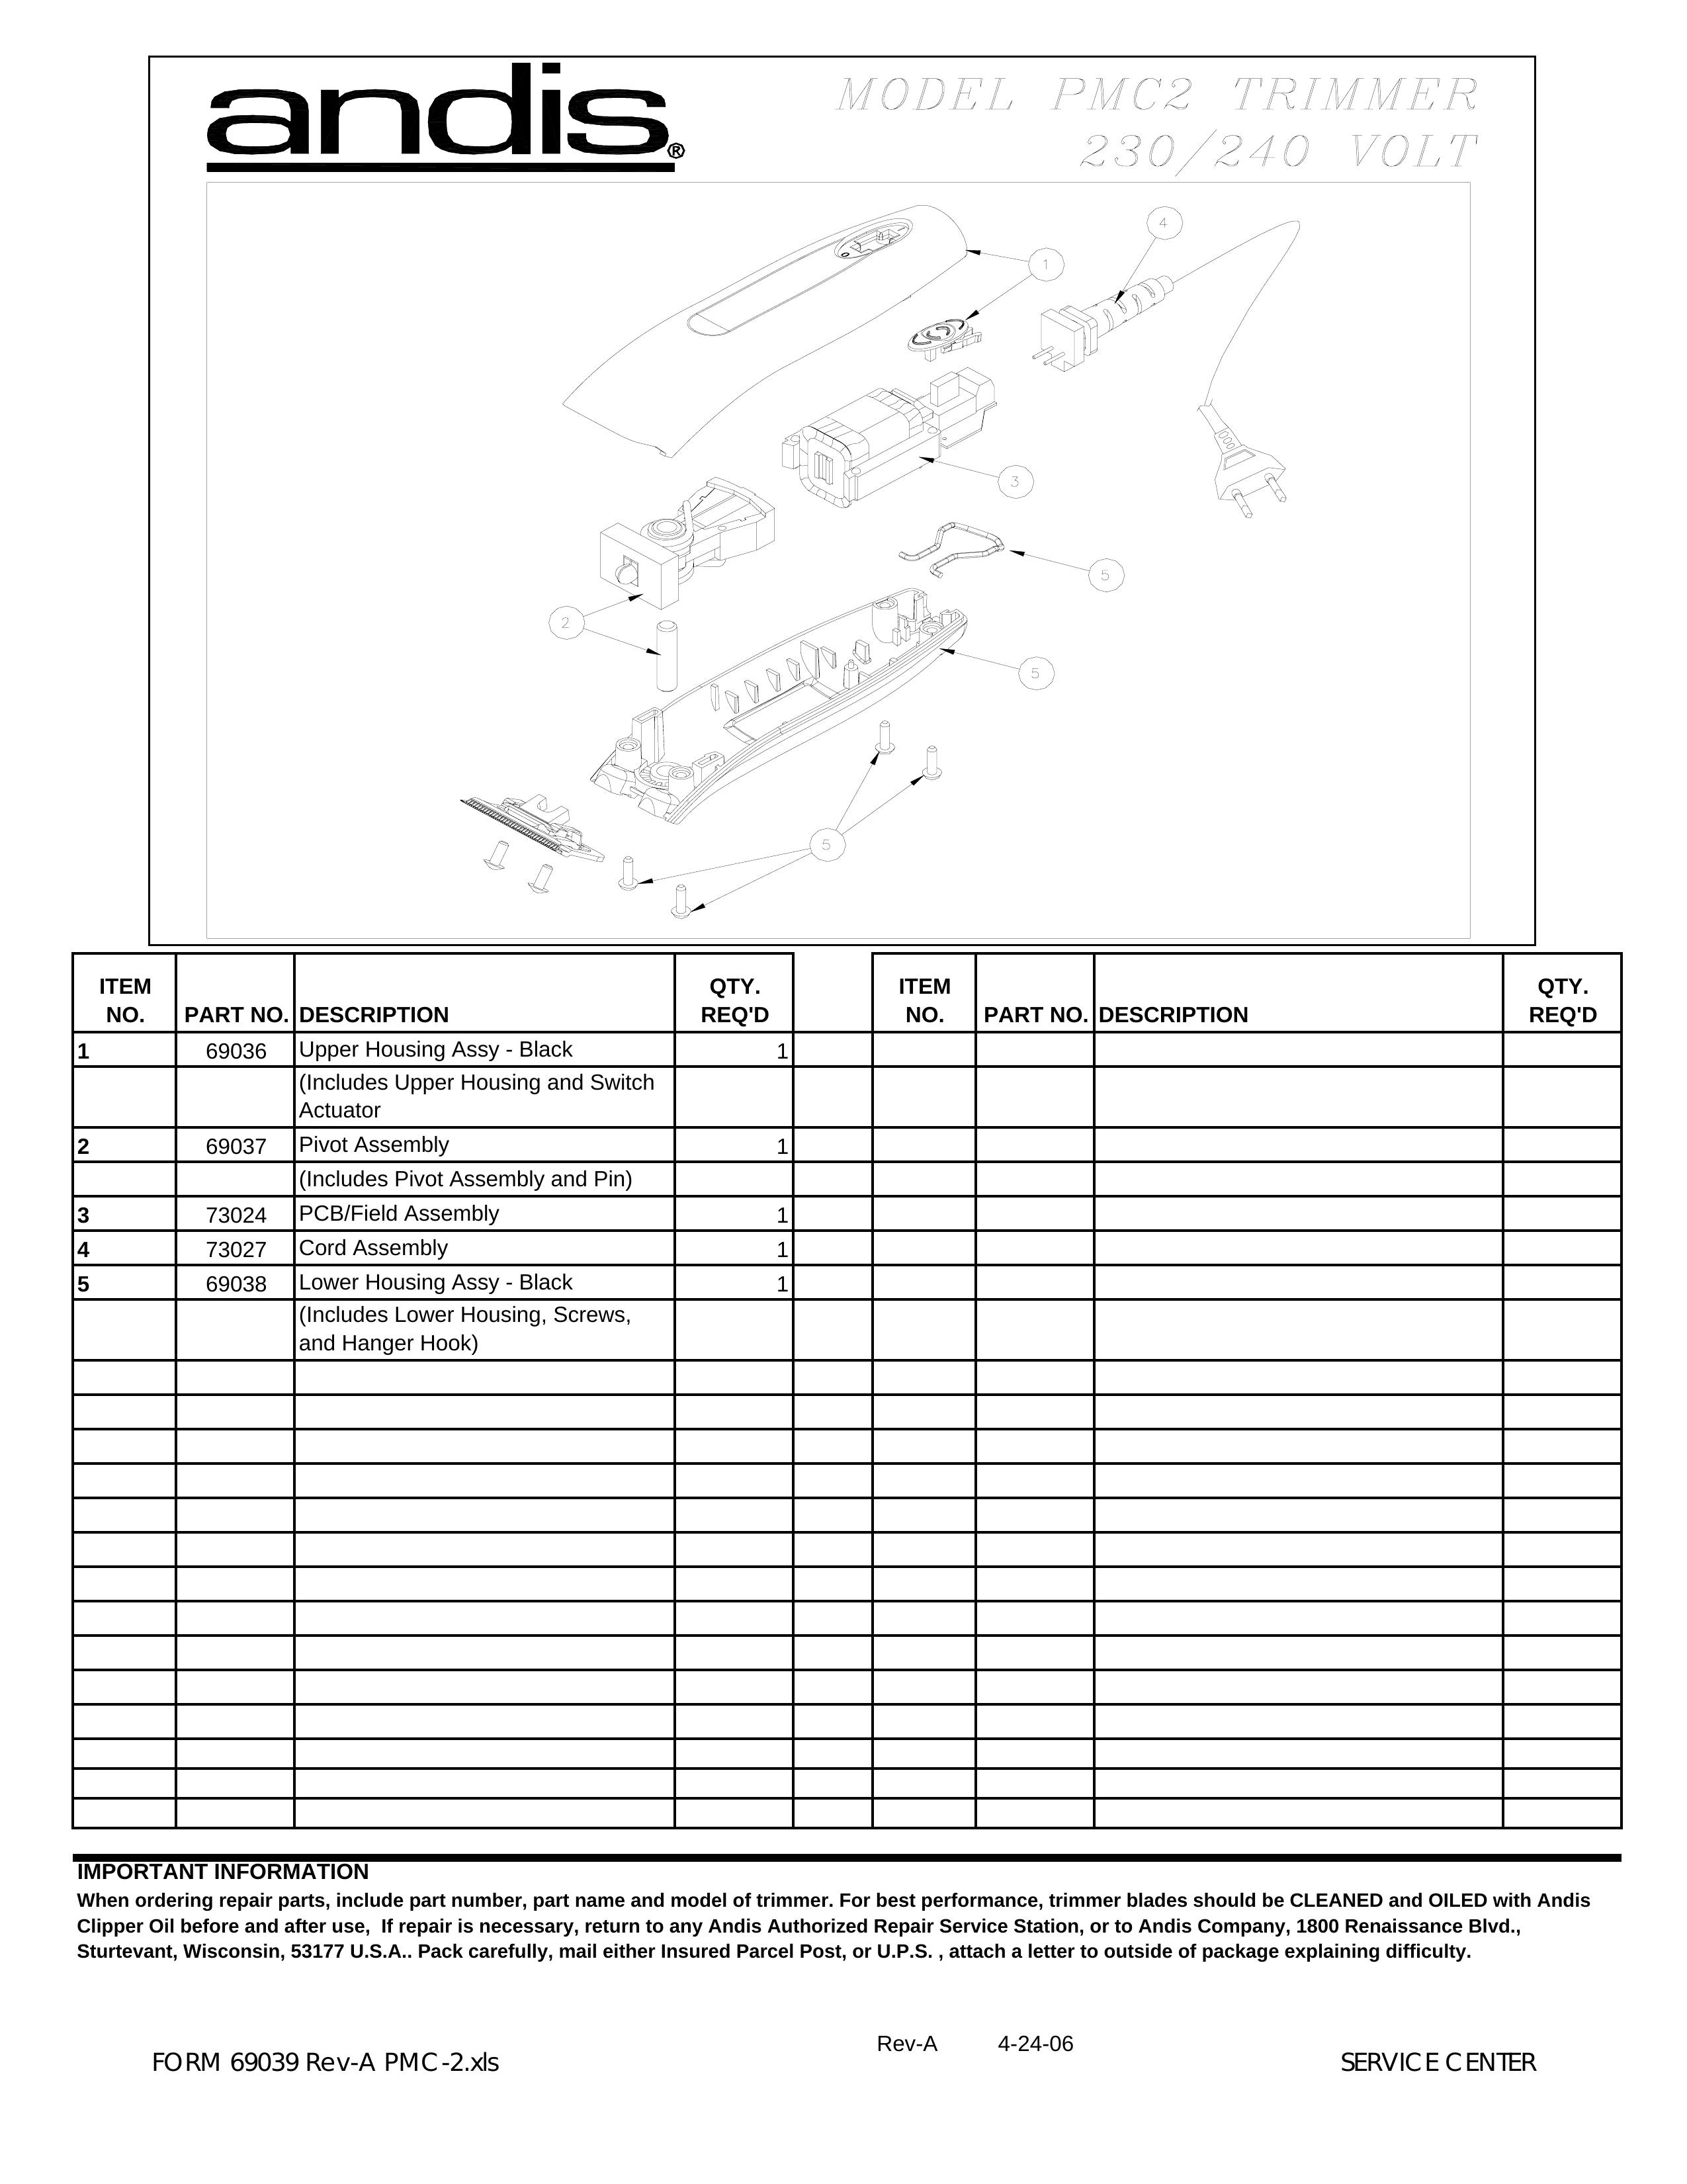 Andis Company PMC-2 Trimmer User Manual